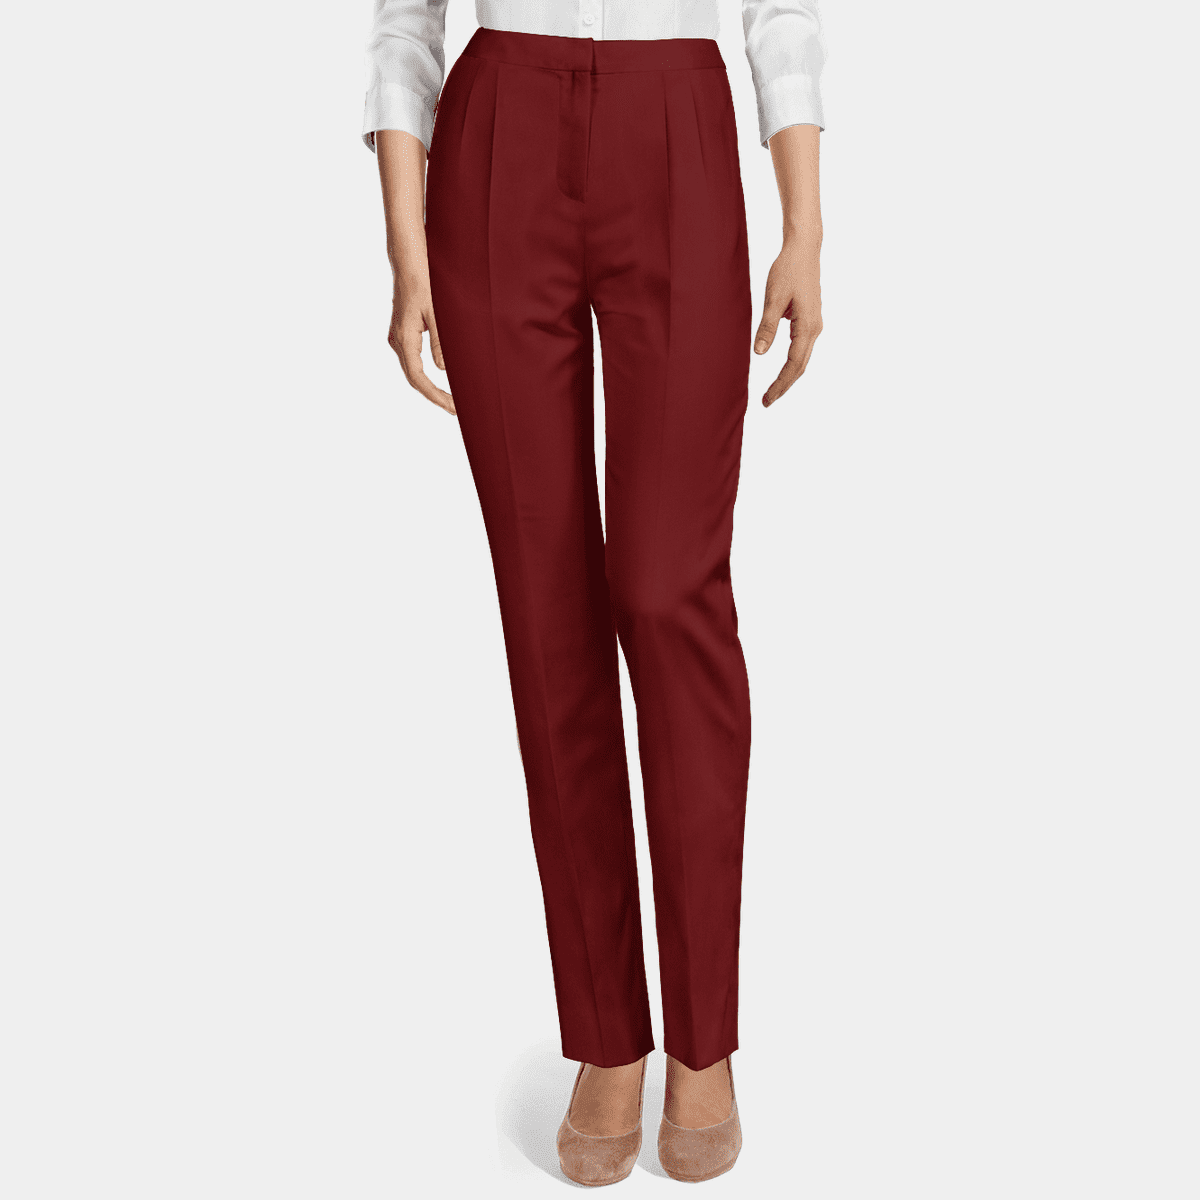 Blush and Burgundy | E's Life & Style | Dress pants outfits, Maroon pants  outfit, Bell bottom pants outfit